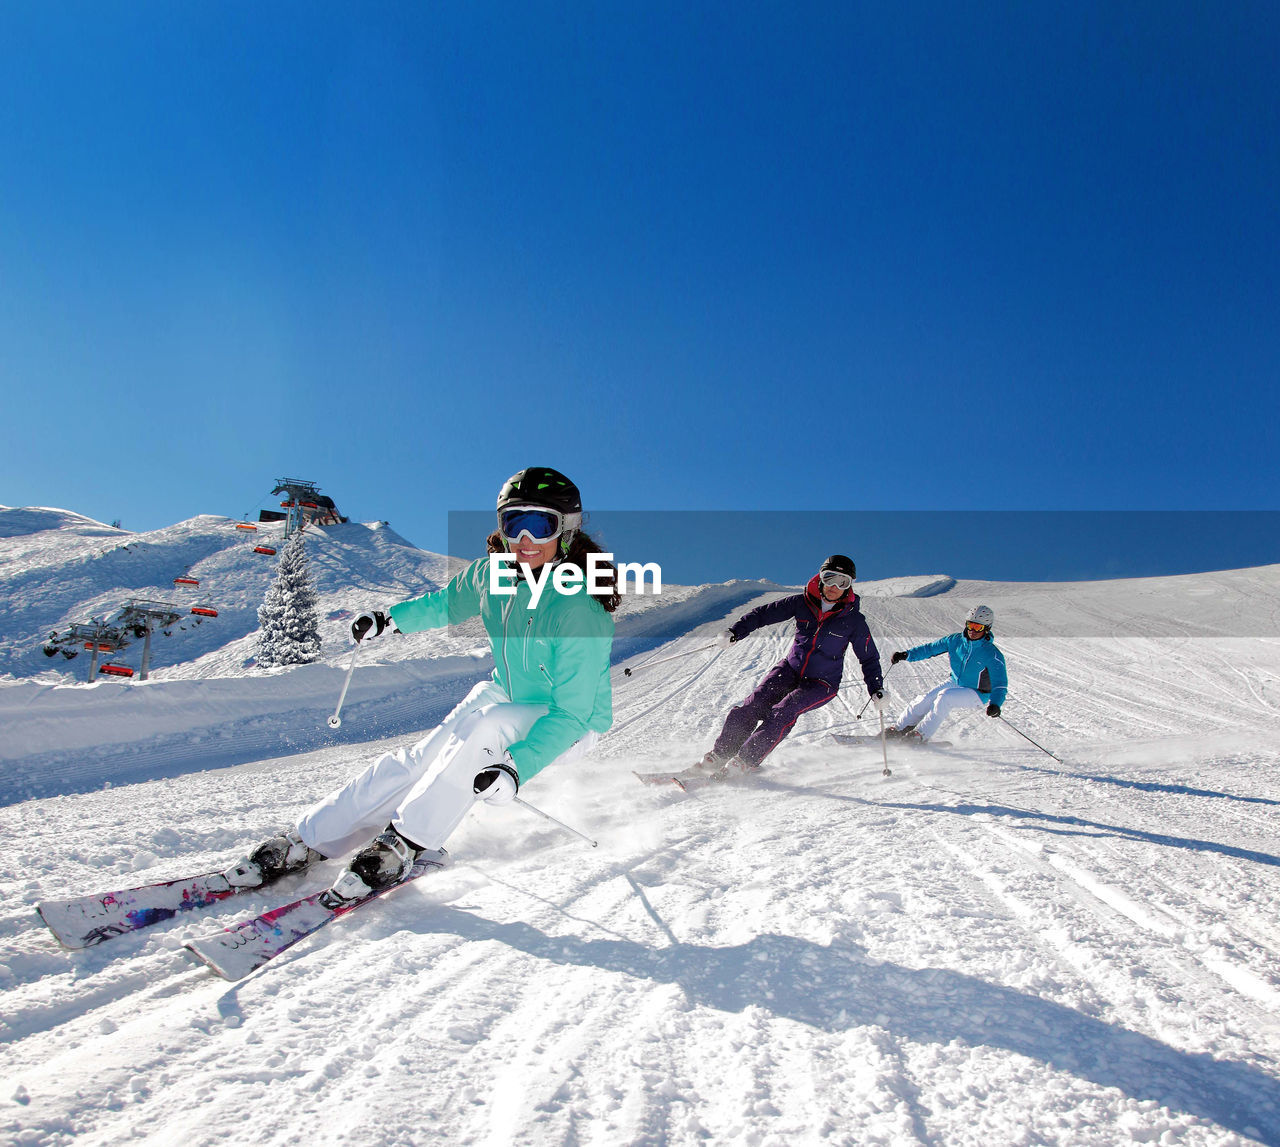 PEOPLE SKIING ON MOUNTAIN AGAINST CLEAR BLUE SKY